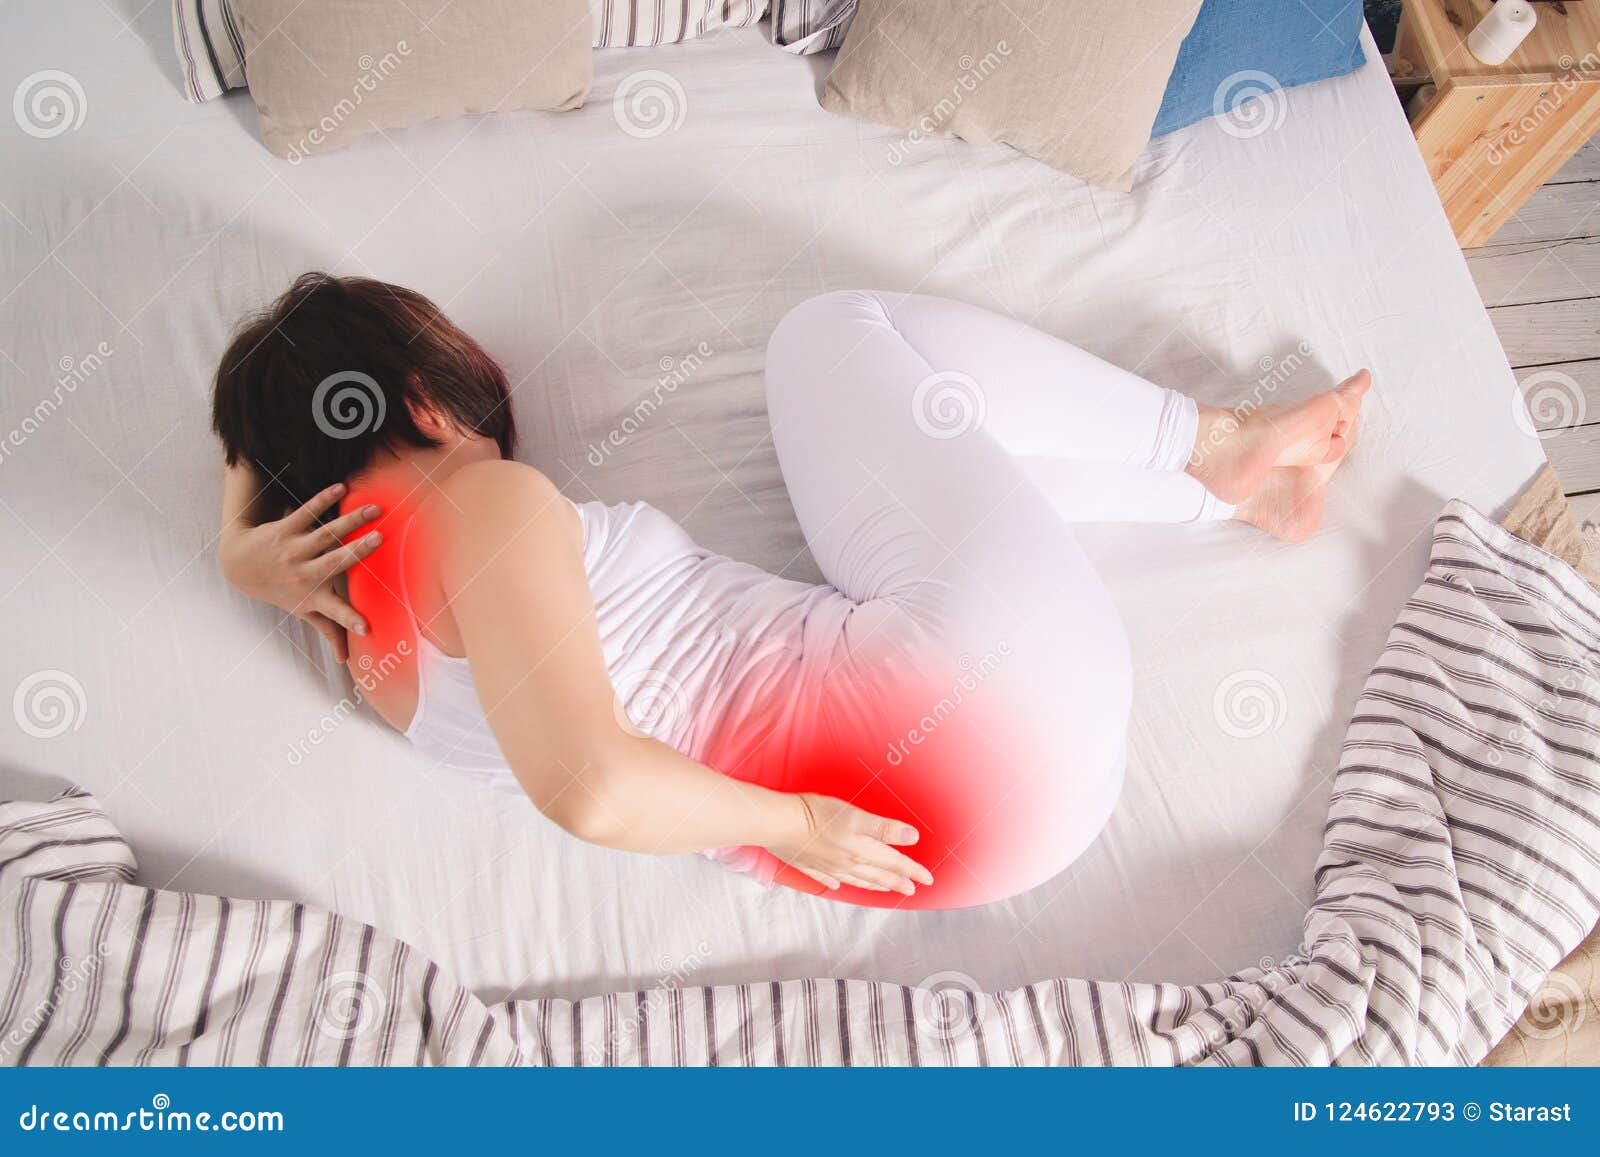 back pain, kidney inflammation, woman suffering from backache at home